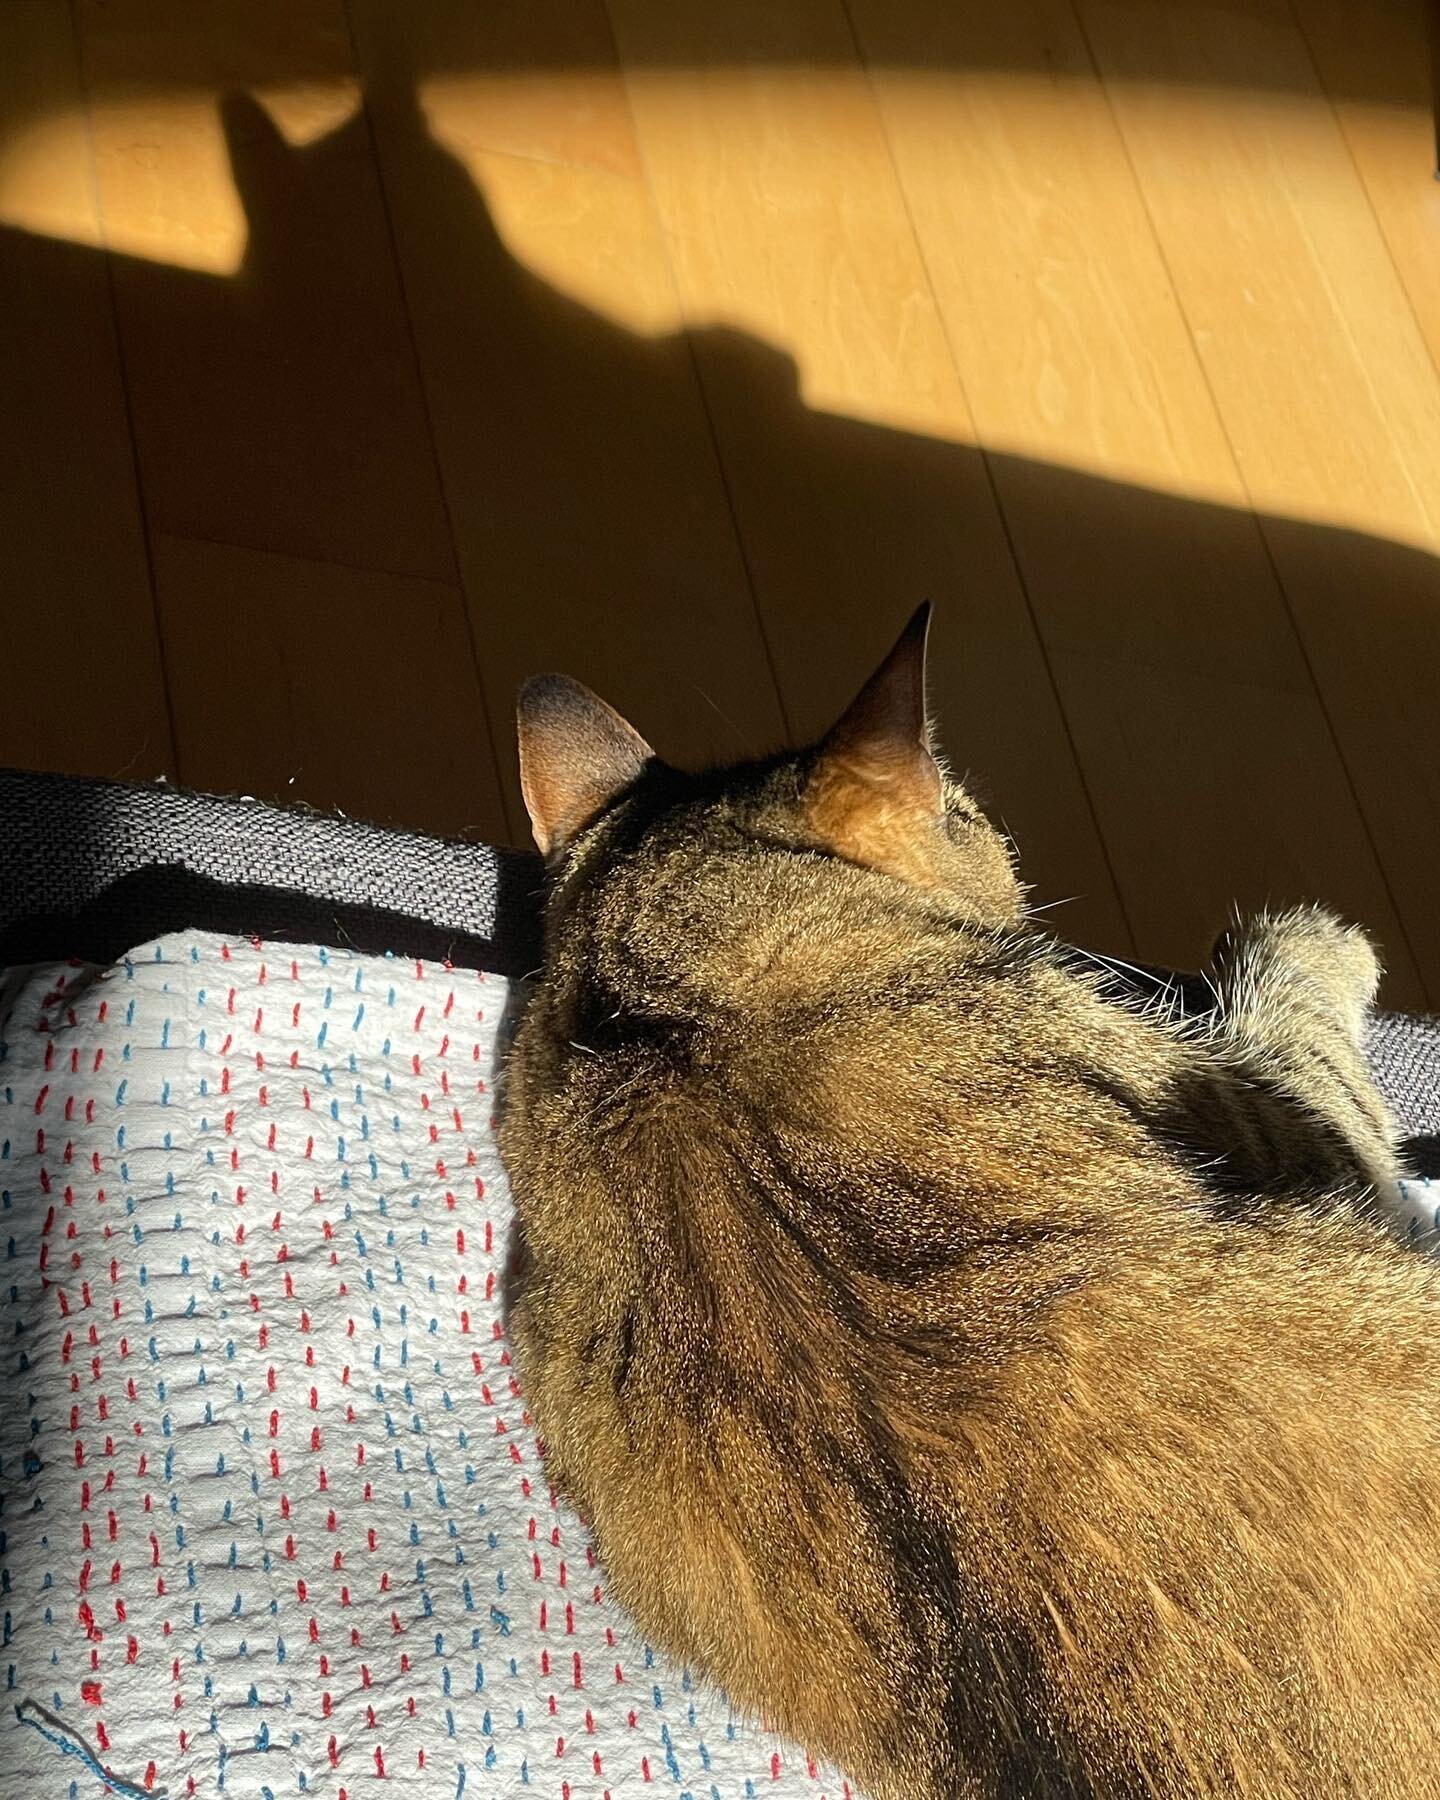 Today, we #celebrate the #americanworker on this #laborday &hellip;. I hope your #holiday is an awesome 😎 one. Here, #momo the #cat takes a moment to chill and watch his #shadow. #happylaborday 👏#mondayvibes